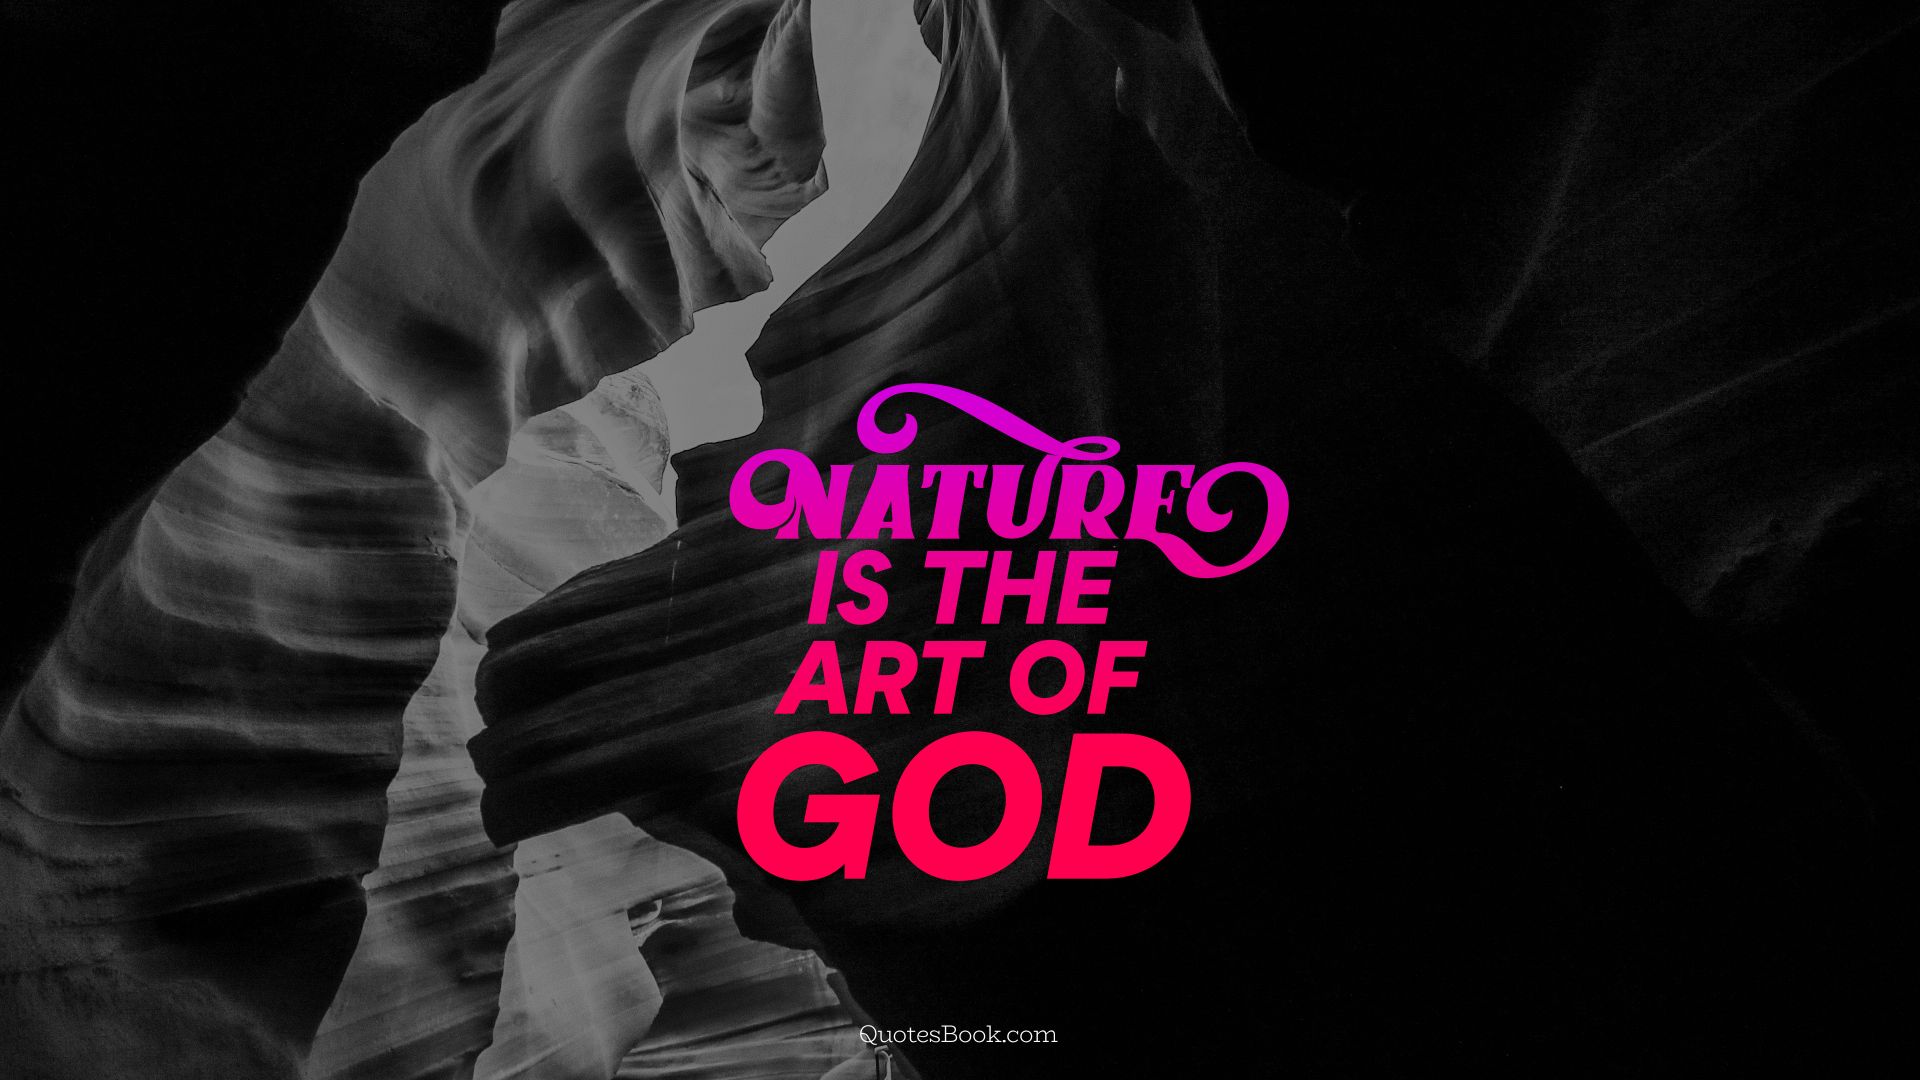 Nature is the art of god